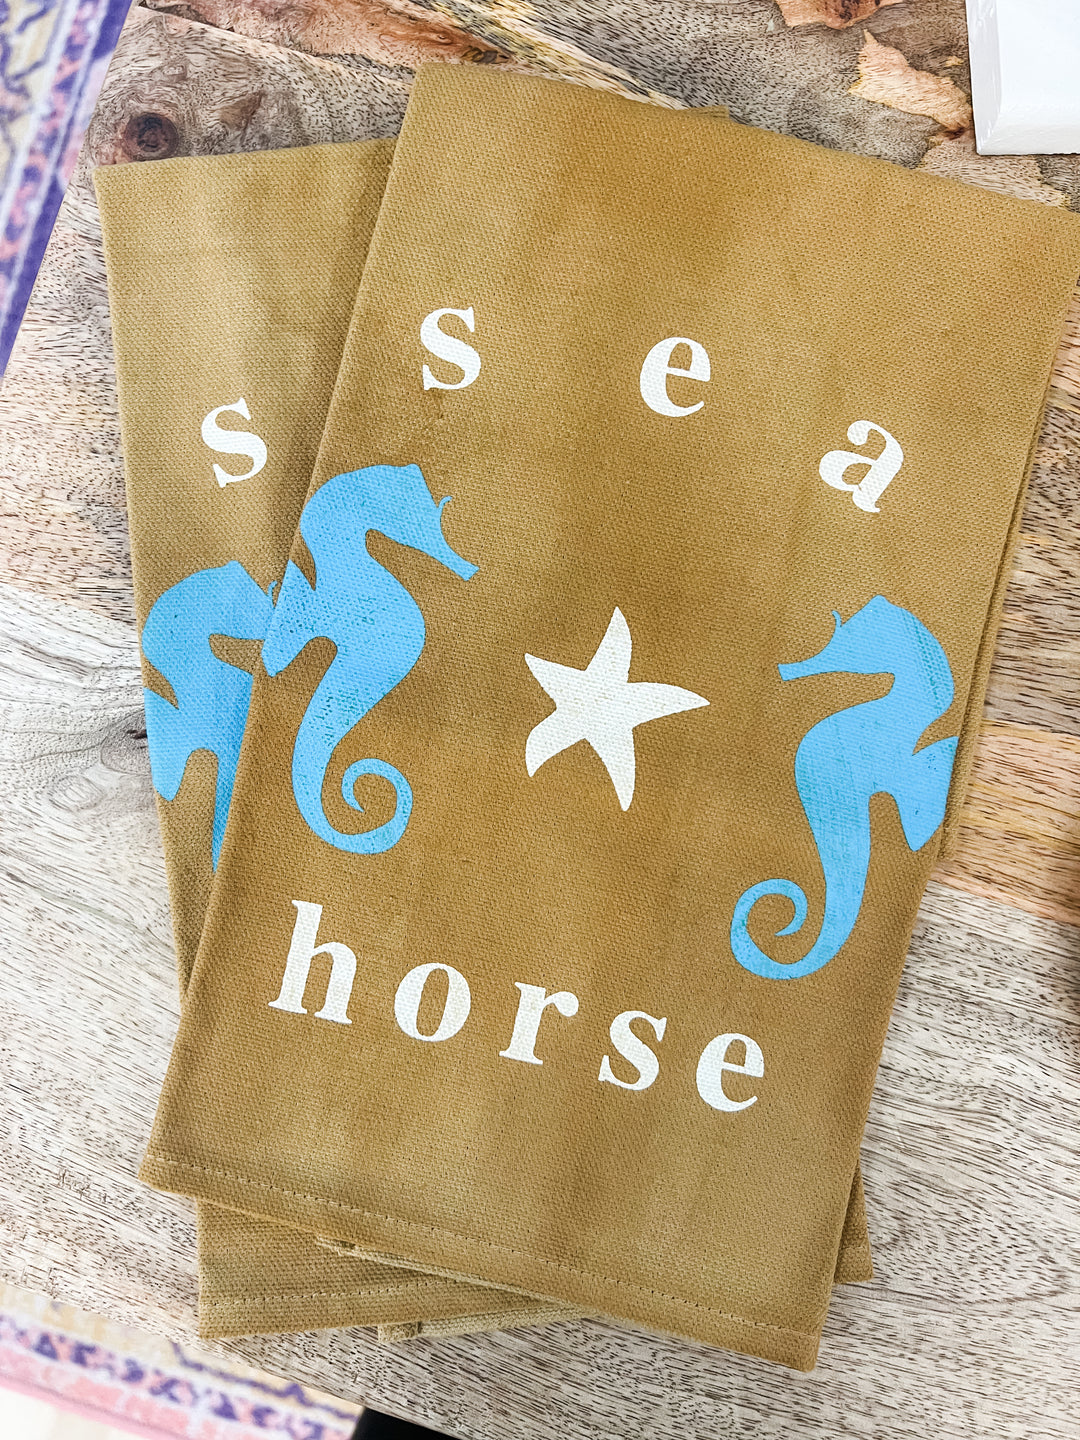 Seahorse Decorative Towel - The Teal Antler Boutique